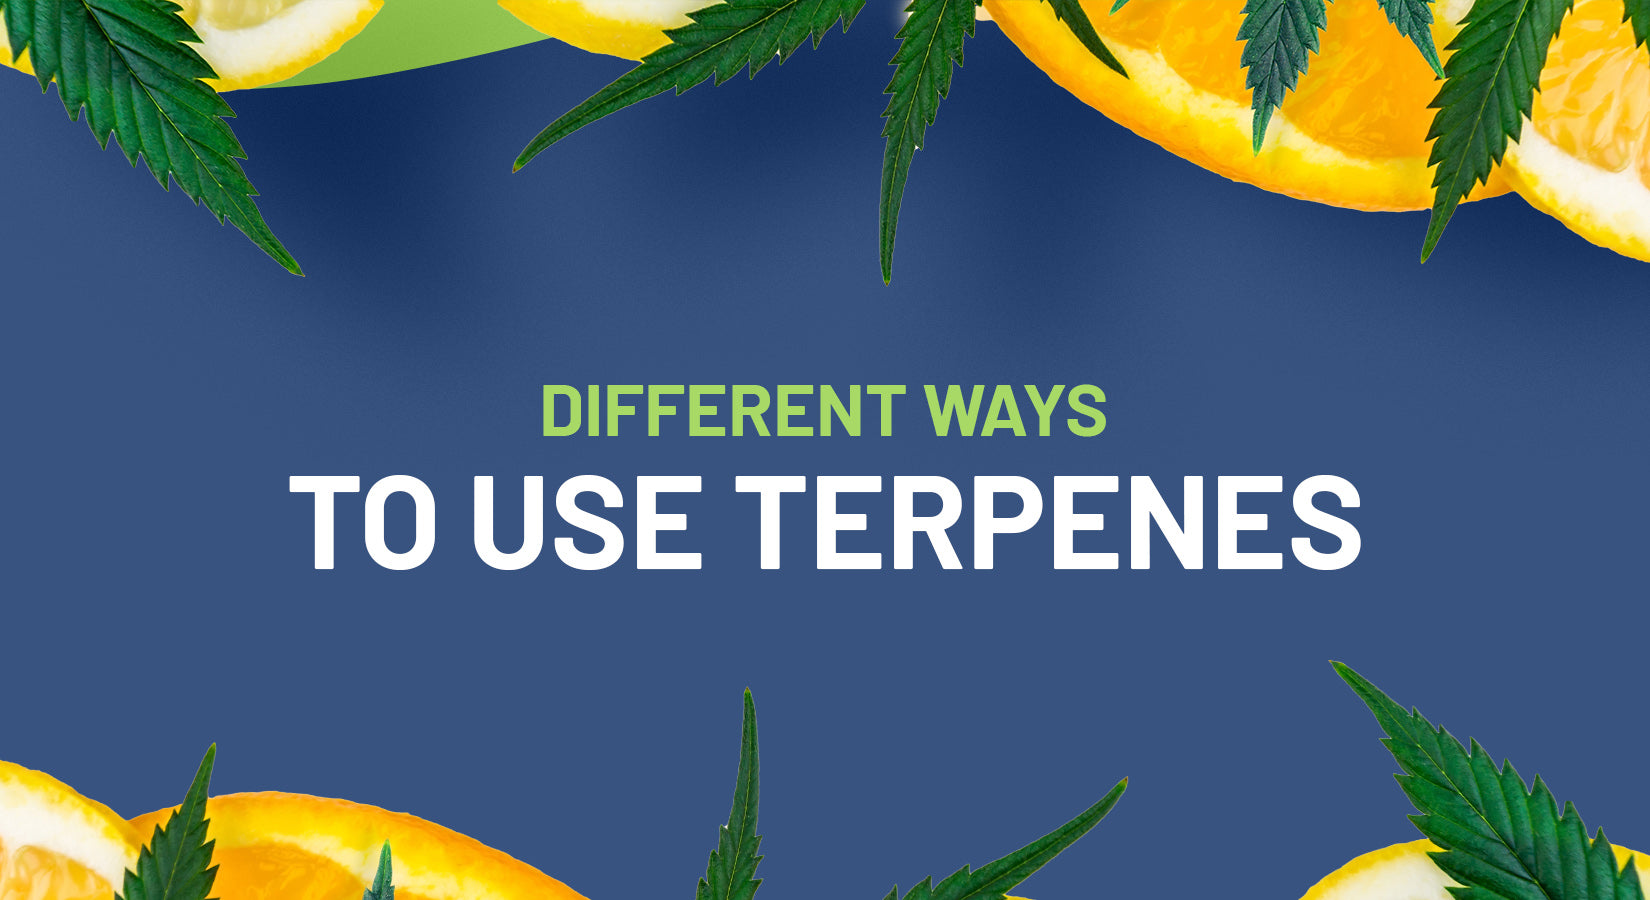 Different Ways to Use Terpenes